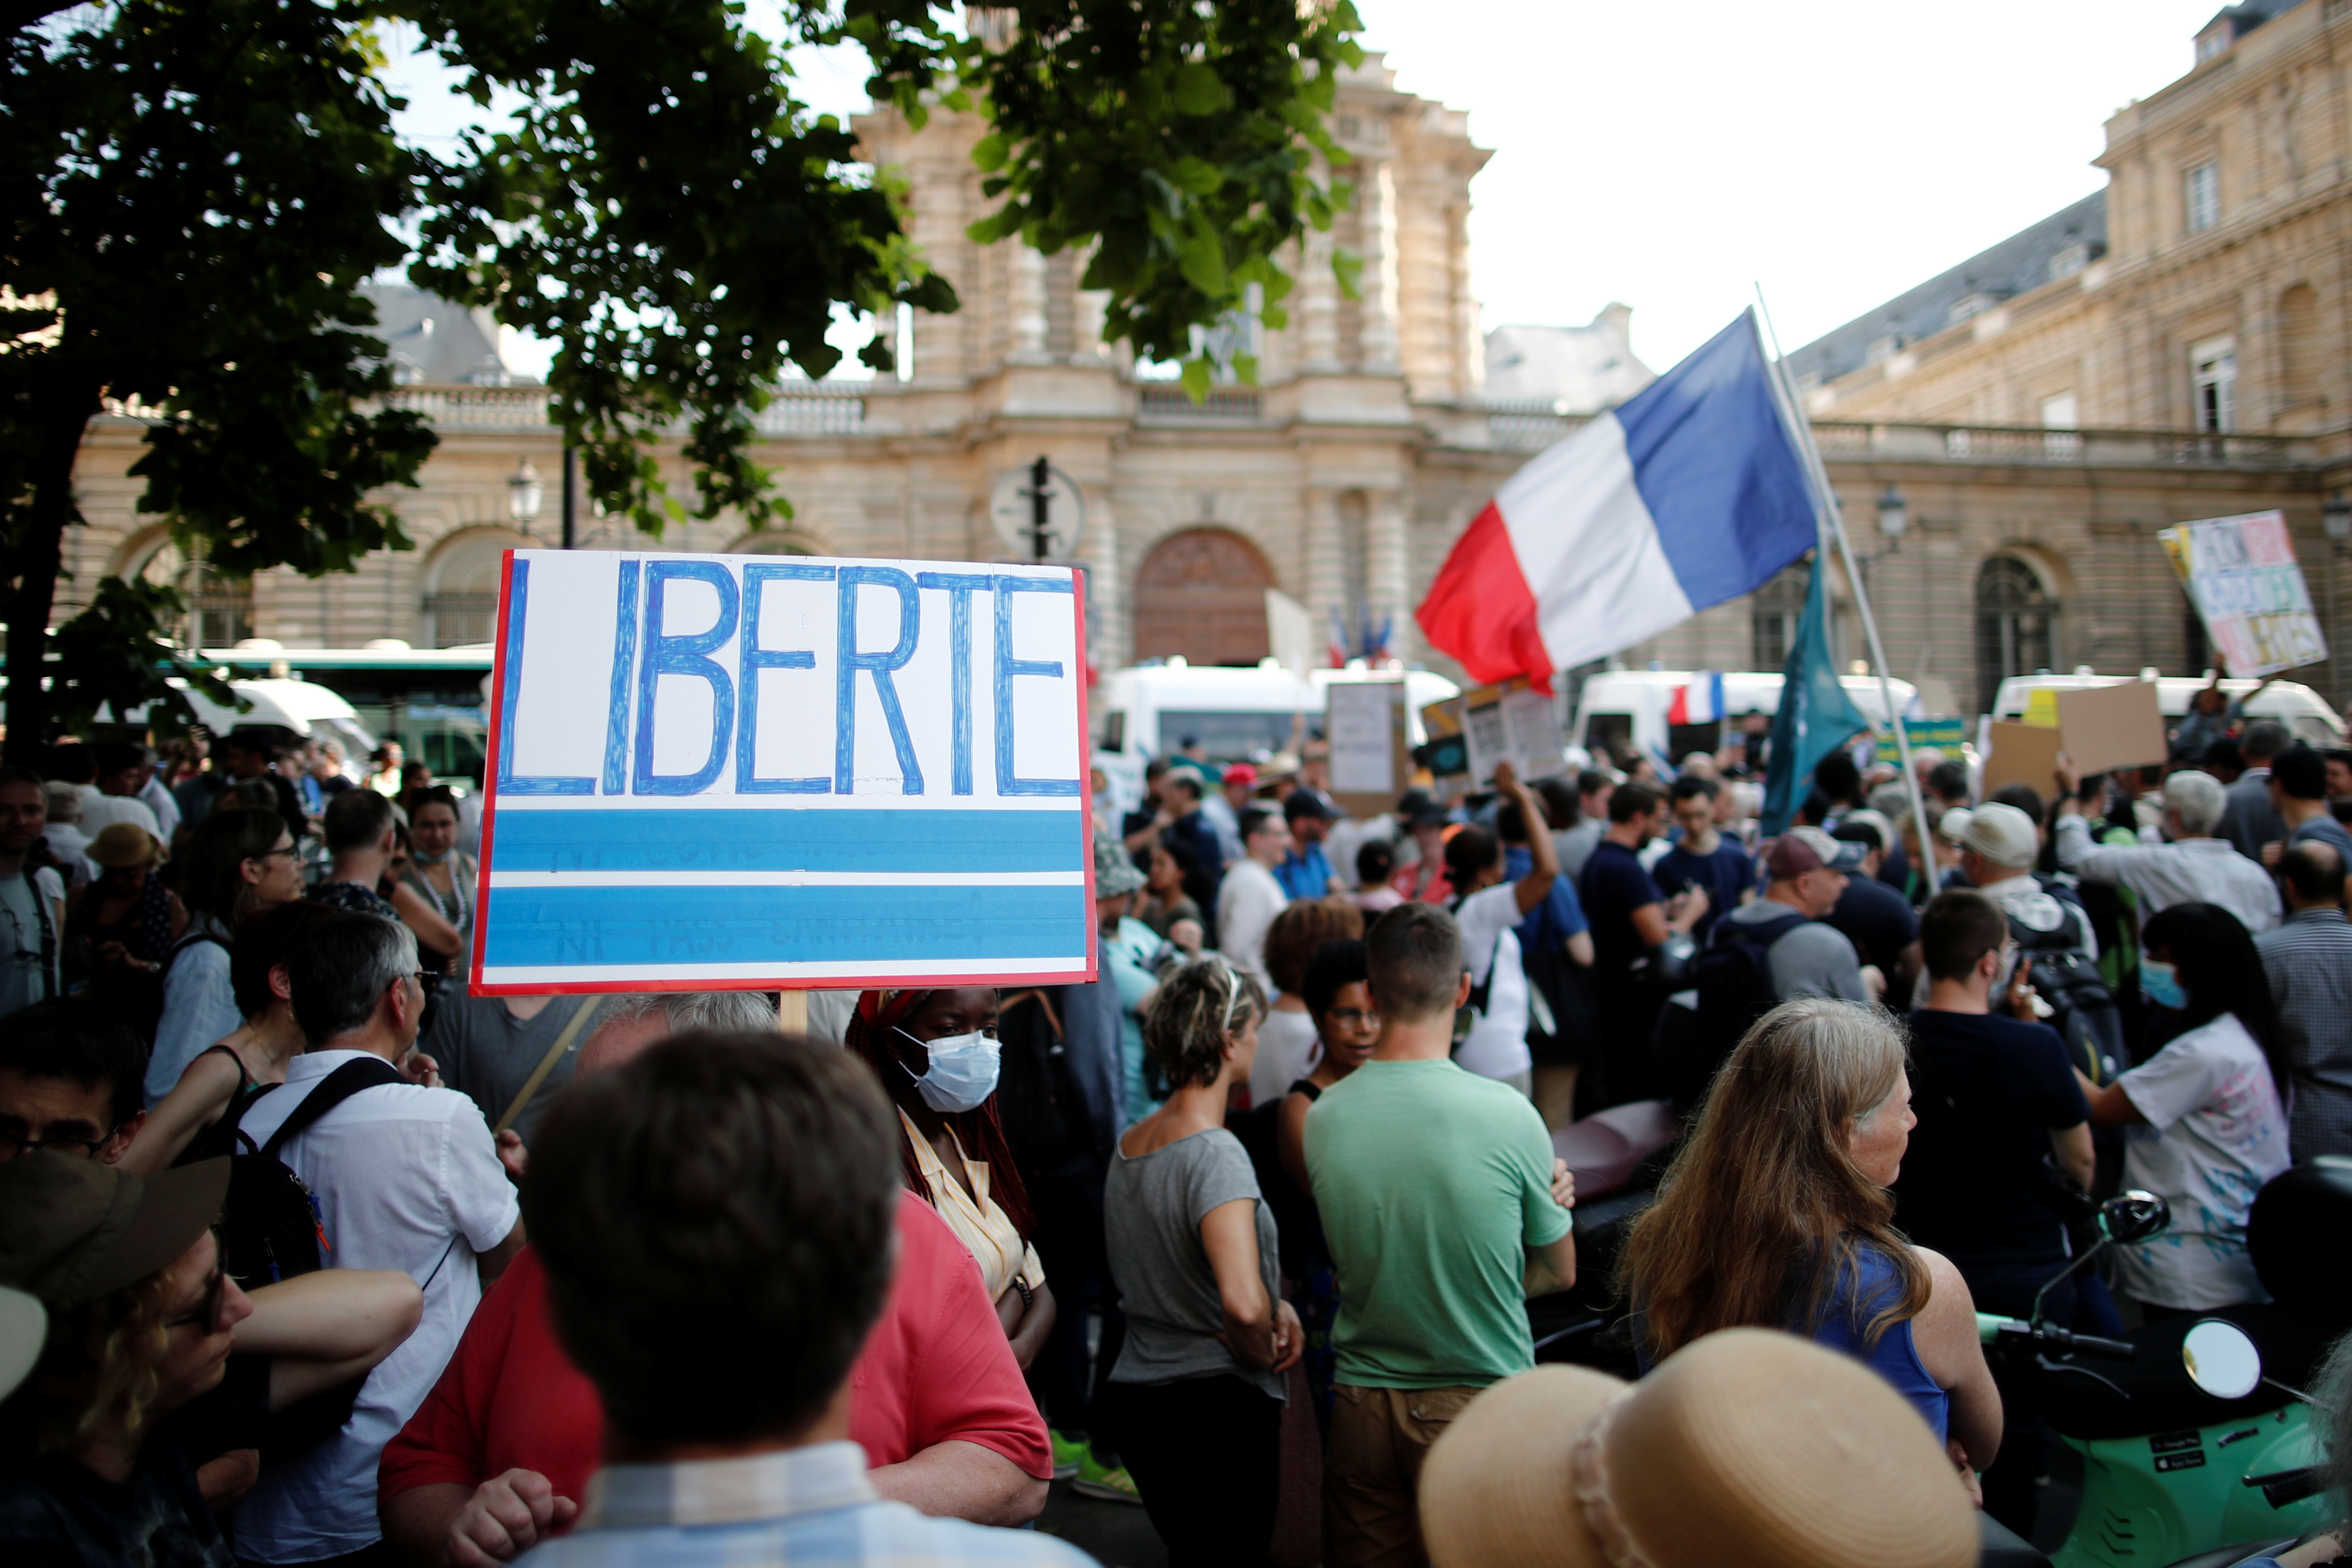 A placard reads "Freedom" during a demonstration called by the Popular Republican Union (UPR) against the new coronavirus safety measures including a compulsory health pass in front of the French Senate in Paris, France, July 22, 2021. REUTERS/Benoit Tessier